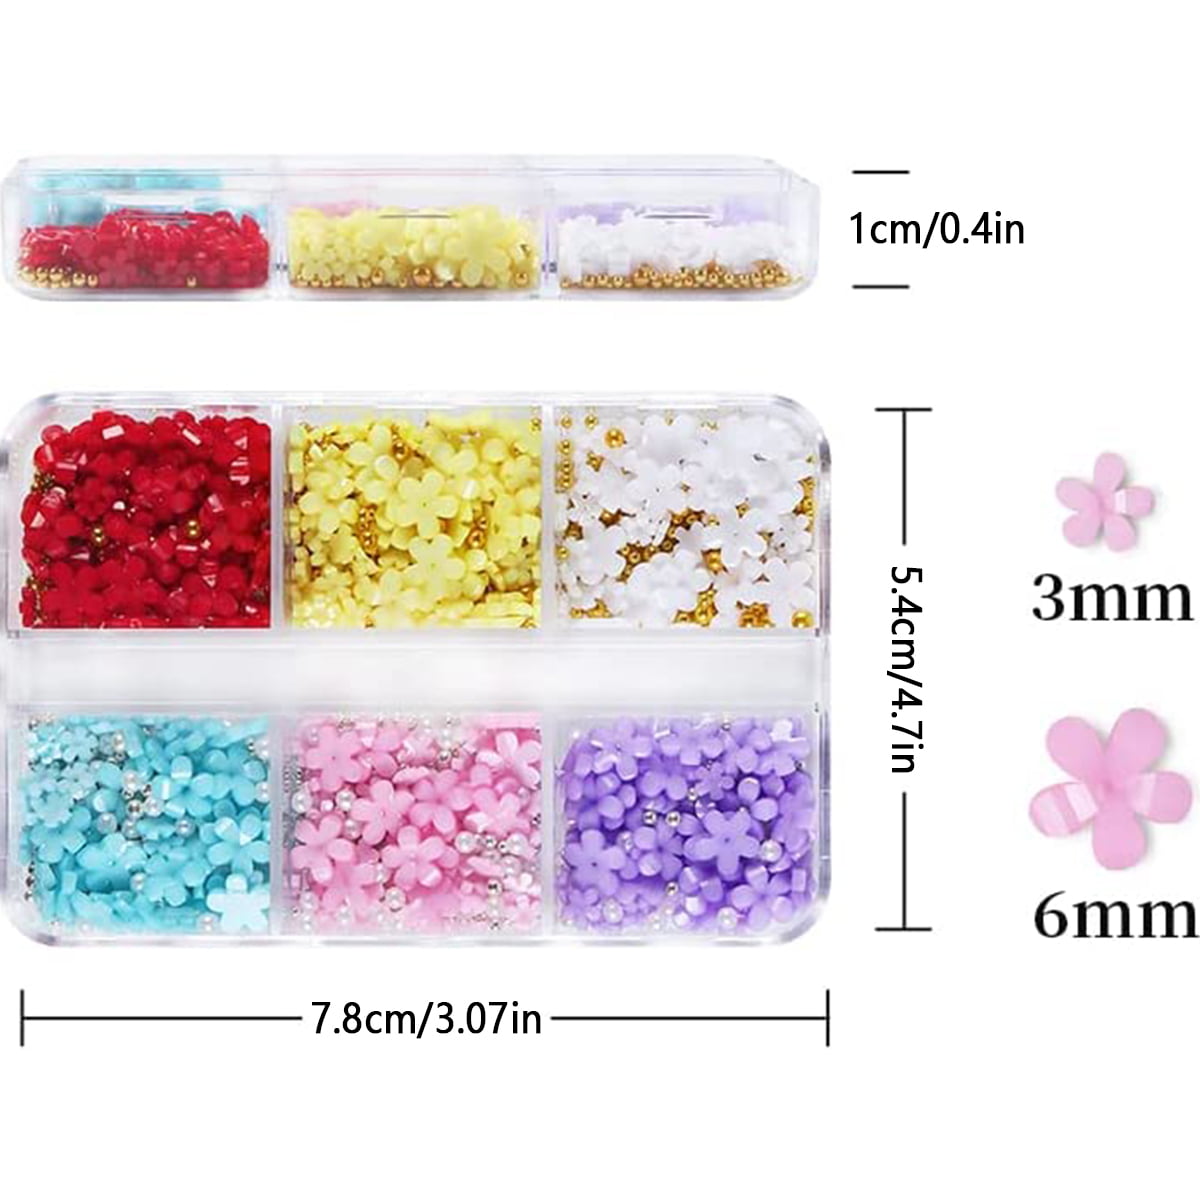 Donano 3D Flower Nail Charms, 2 Boxes 3D Acrylic Flower Nail Art Rhinestones, 3D Flowers for Nails,White Cherry Blossom Spring Acrylic Nail Supplies with